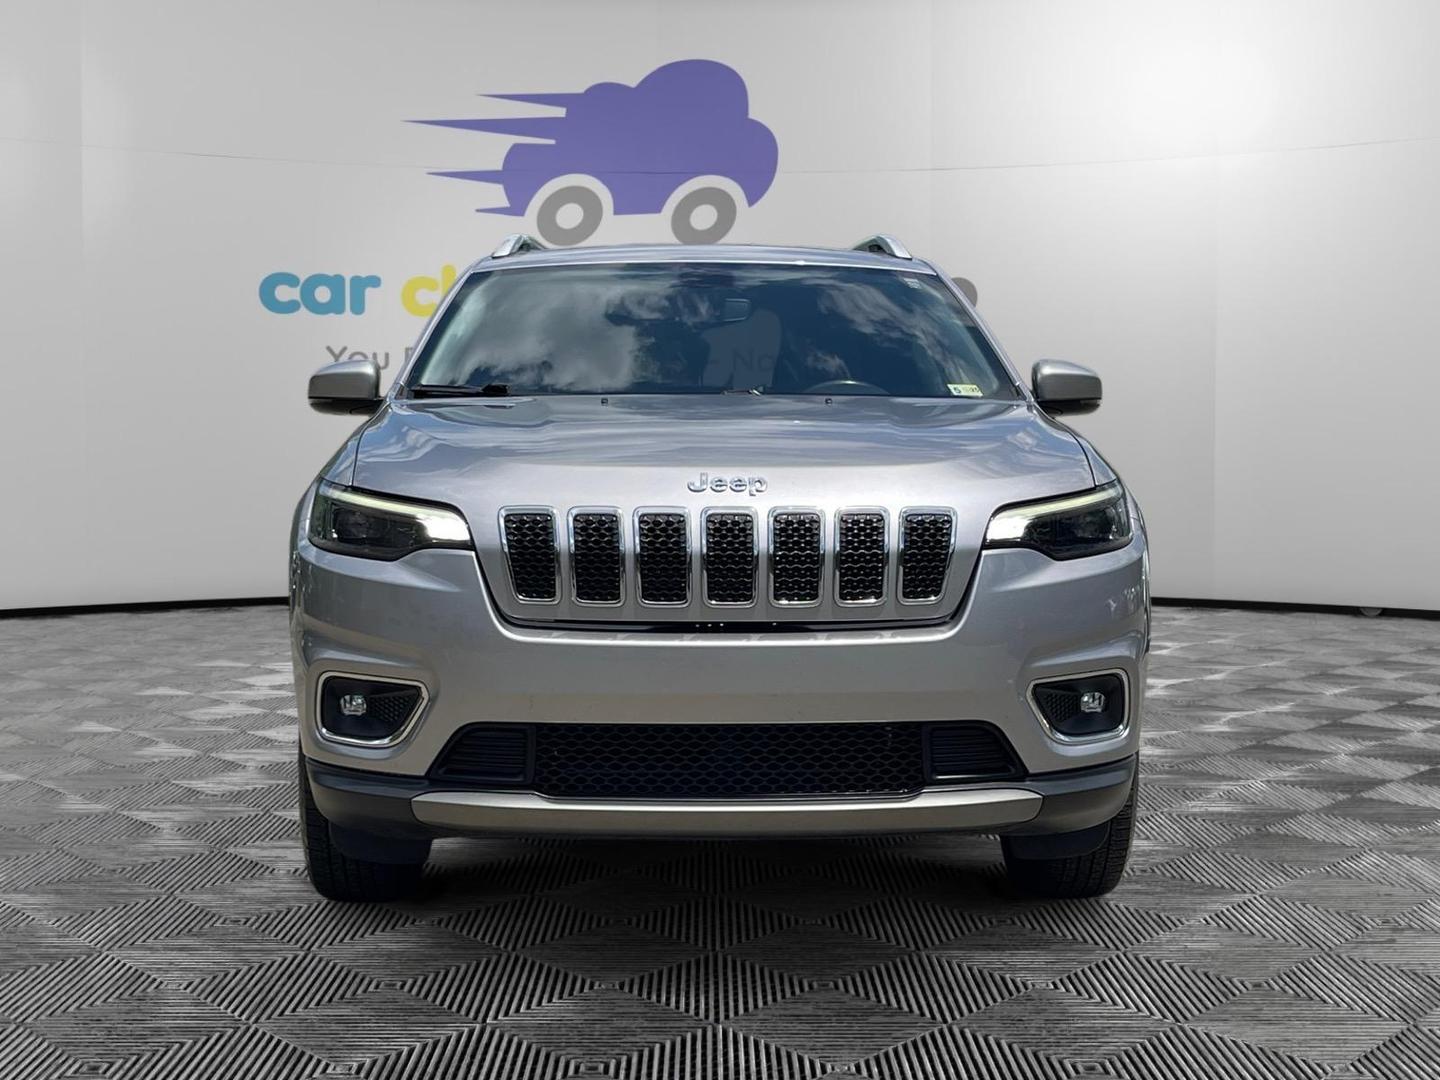 2019 Jeep Cherokee Utility 4d Limited 4wd 3.2l V6 - Image 8